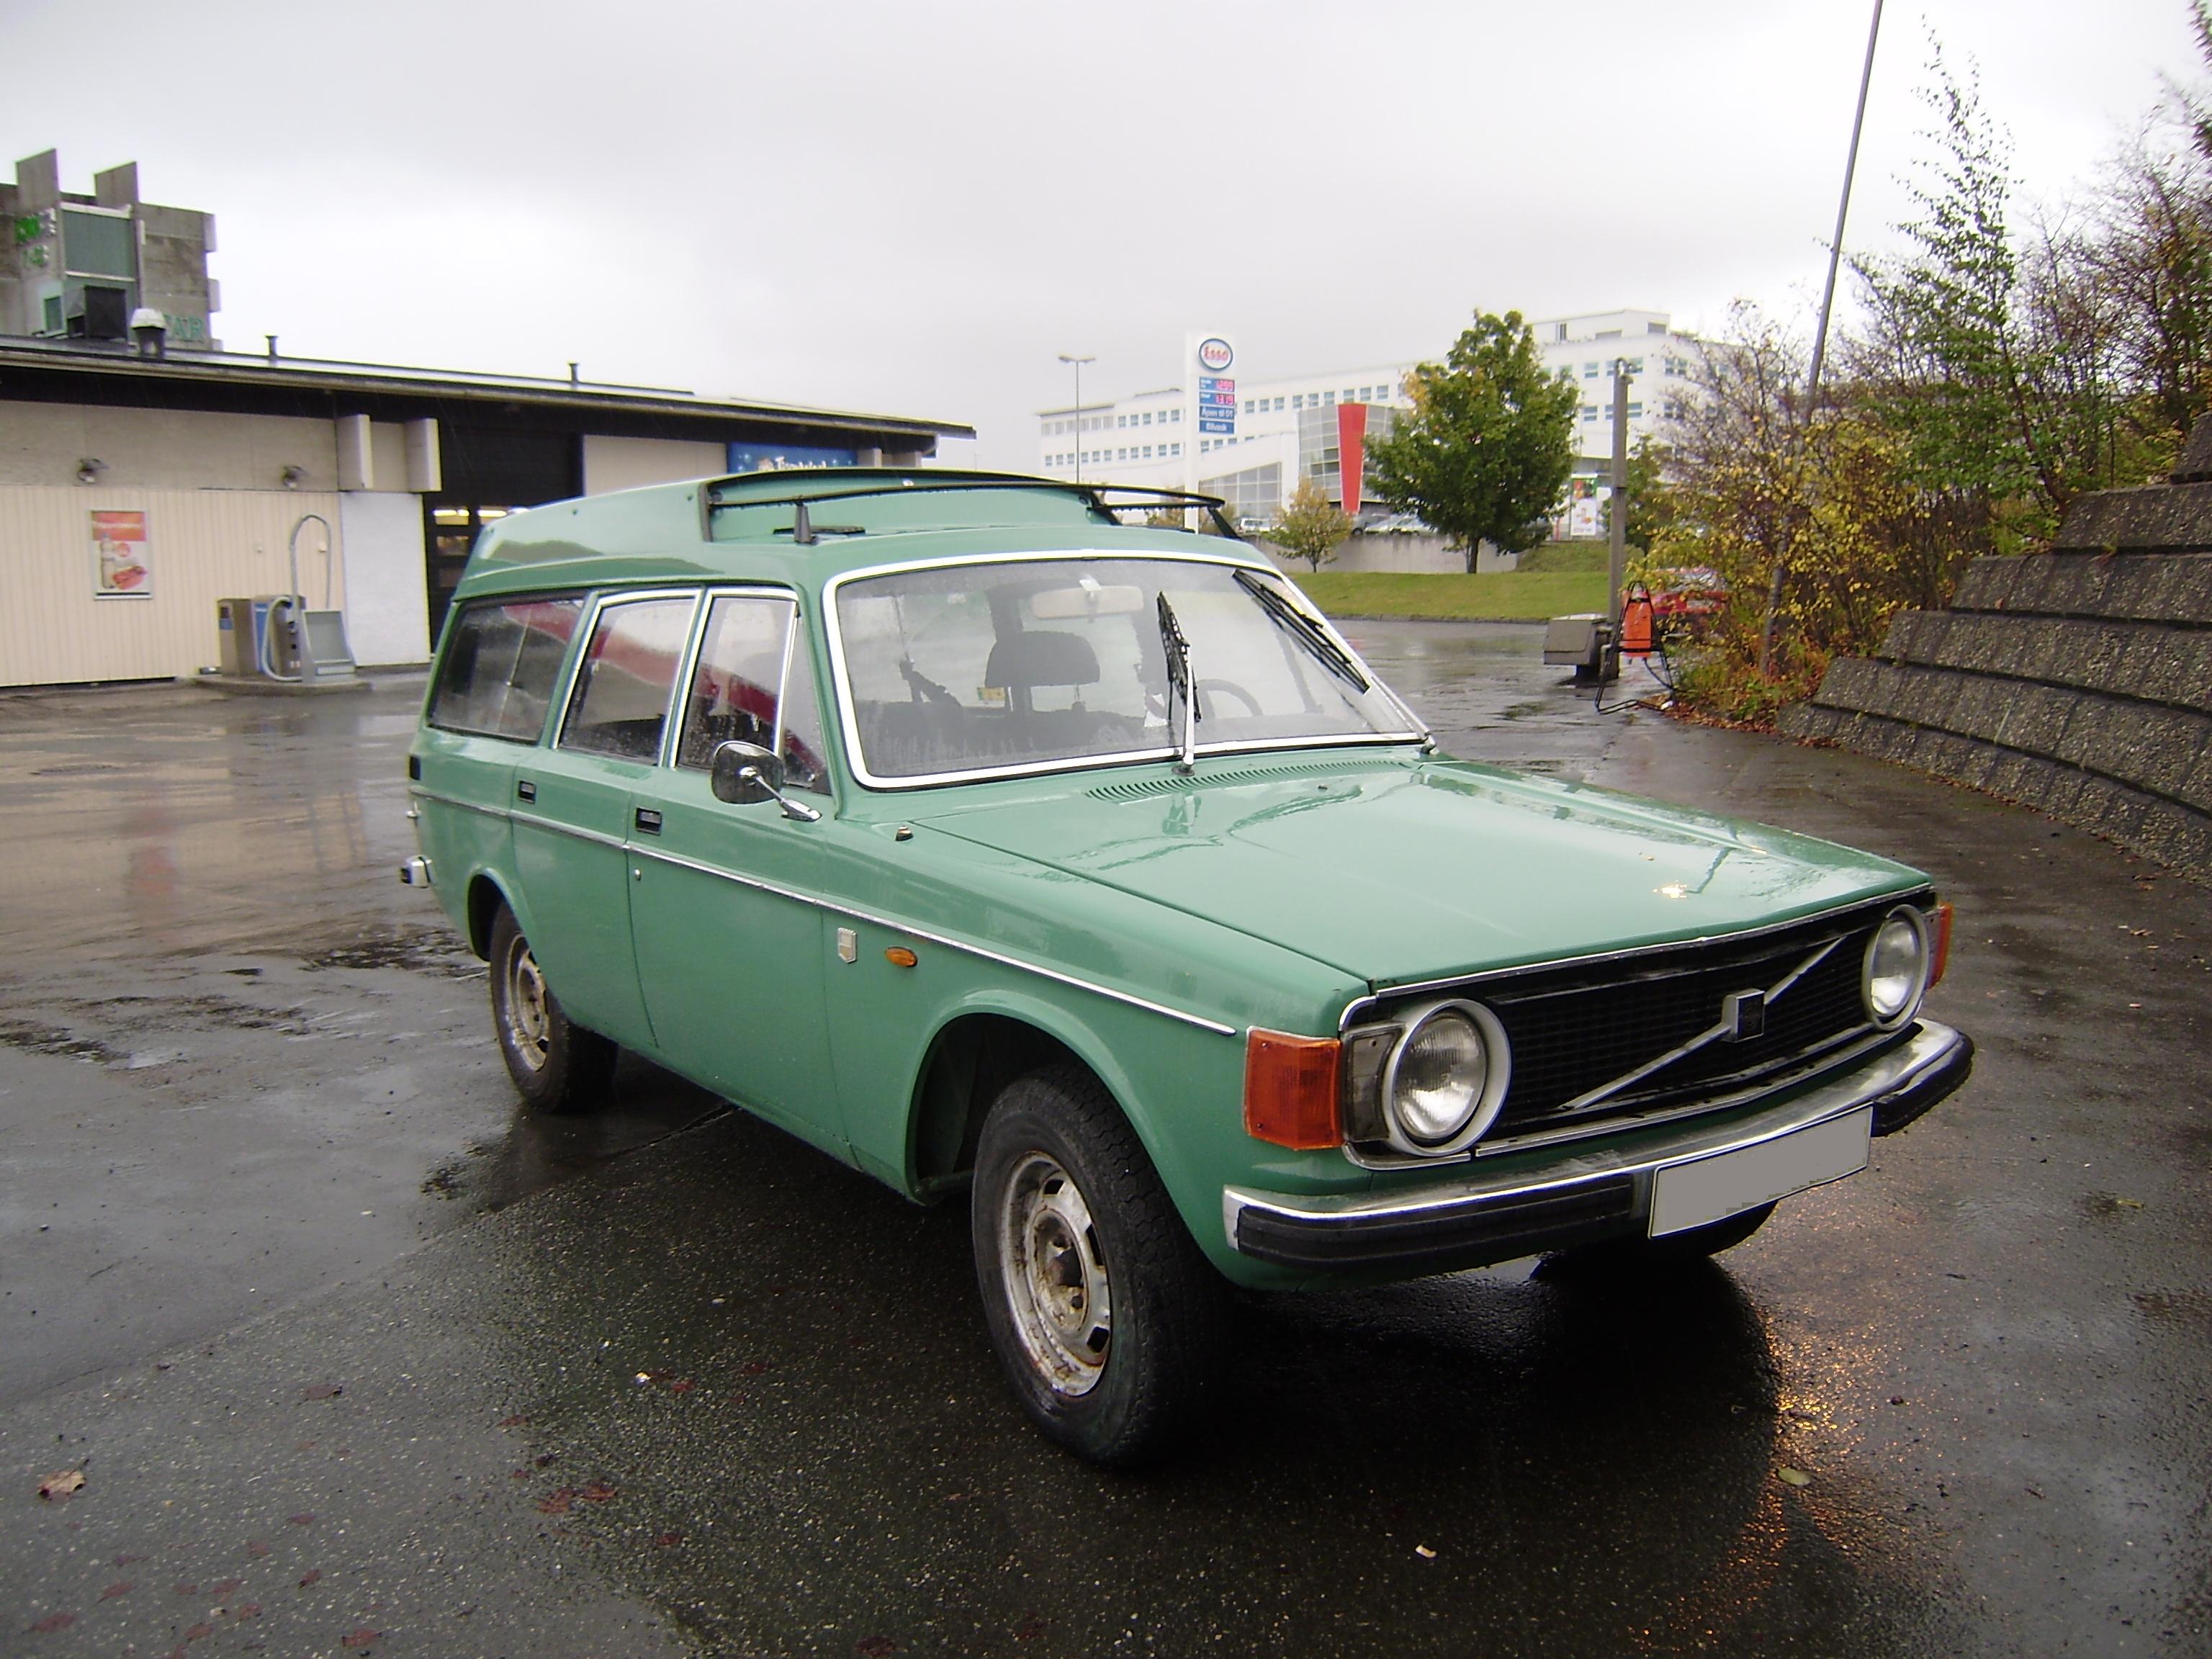 Volvo 145 Express. Posted on October 3, 2008 by parrio